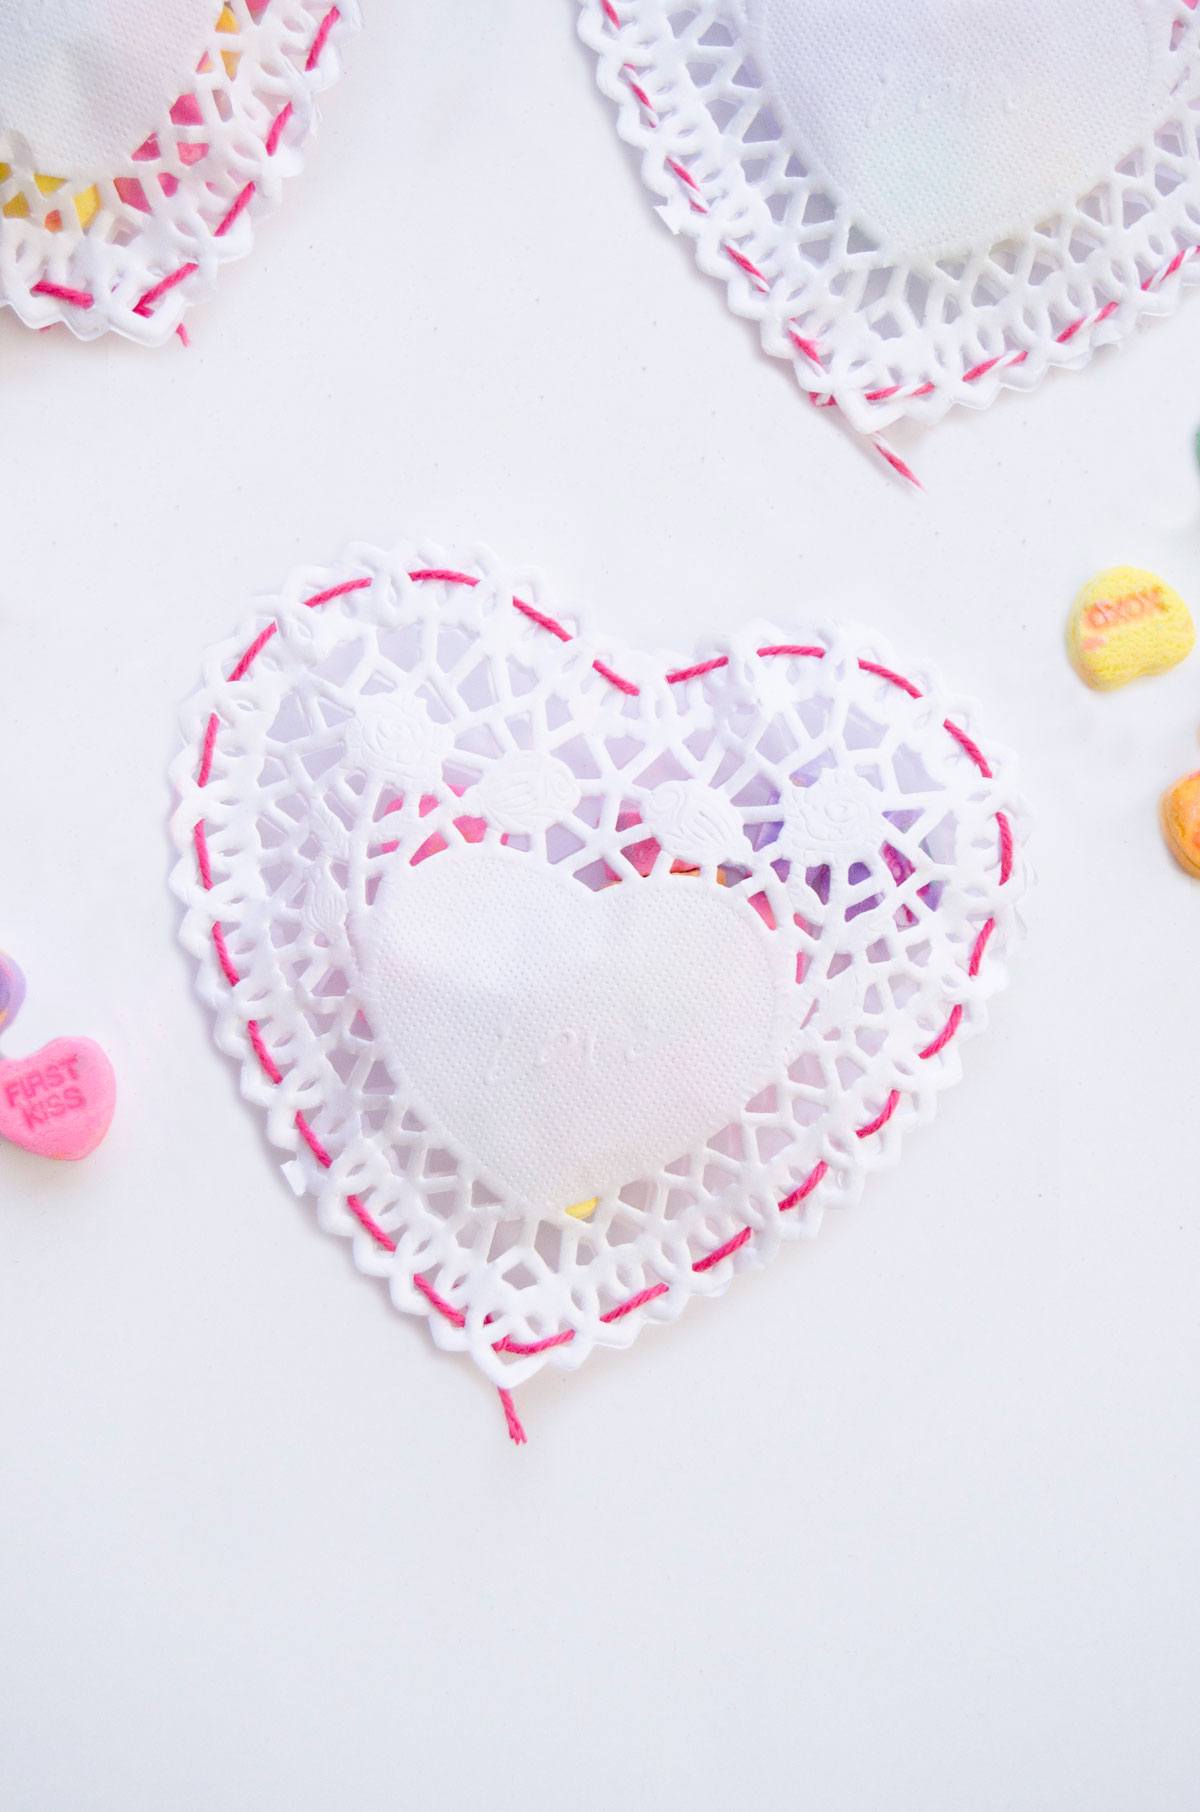 Doily Craft Ideas by Lindi Haws of Love The Day